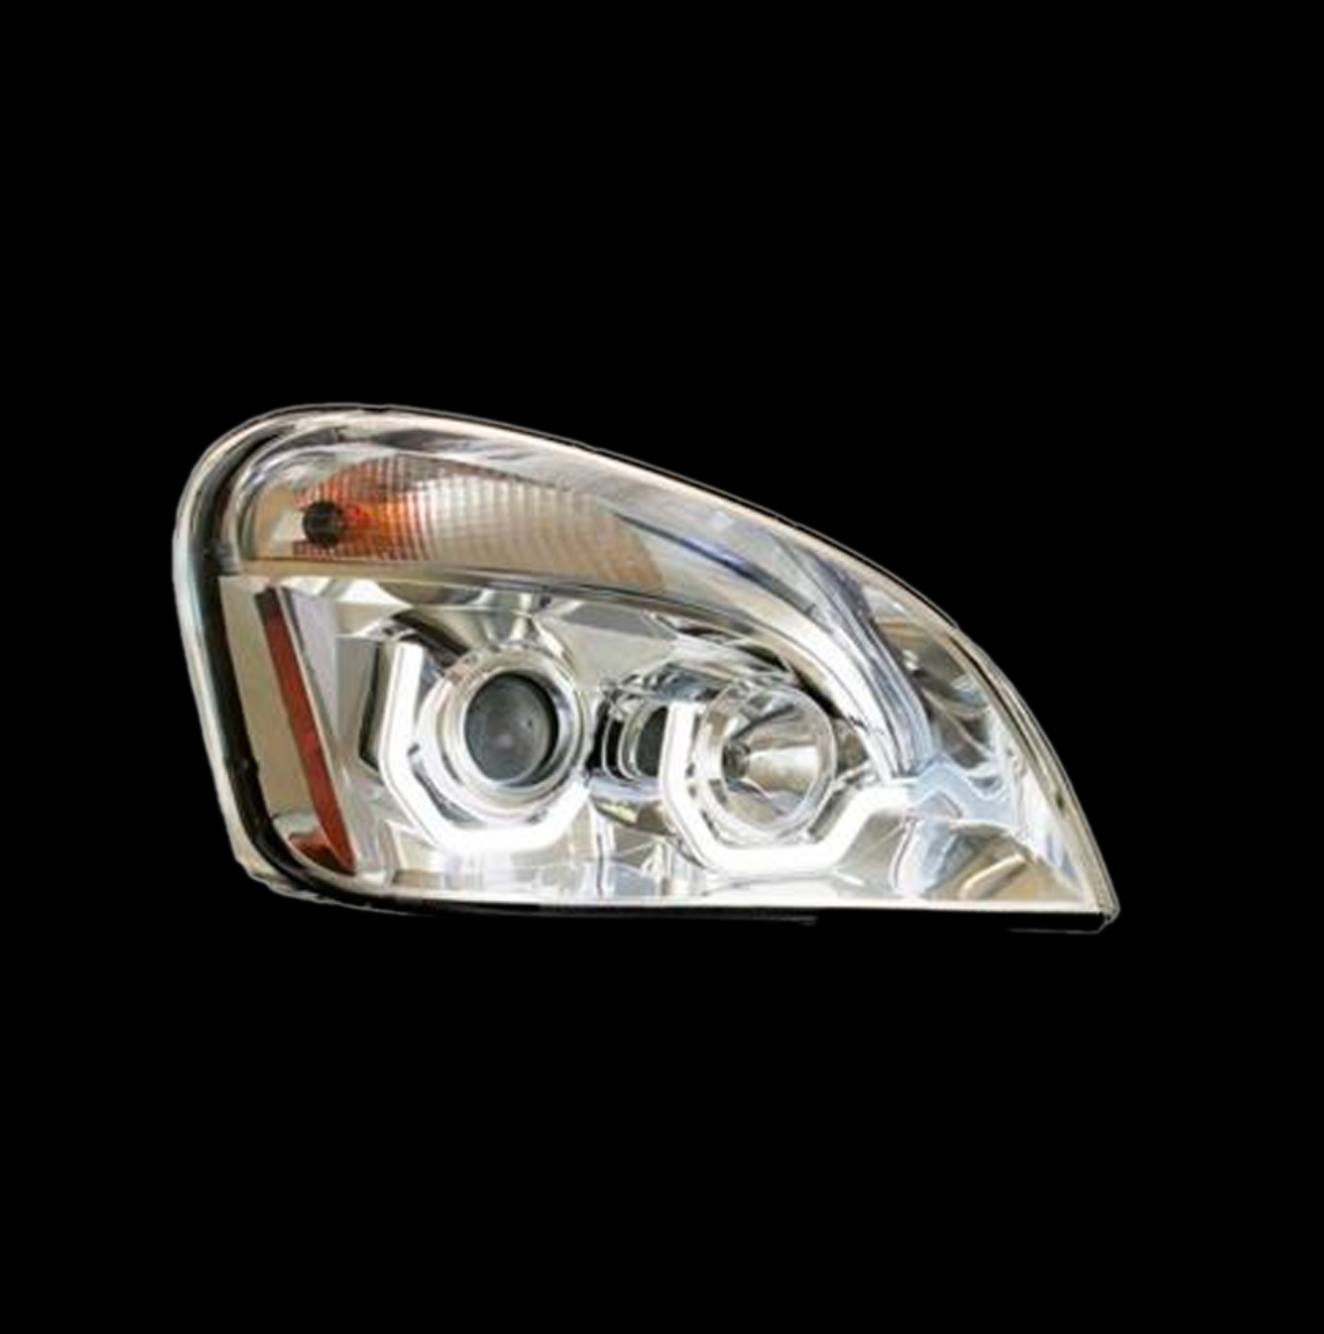 Freightliner Cascadia Projection Headlight  Clear Housing